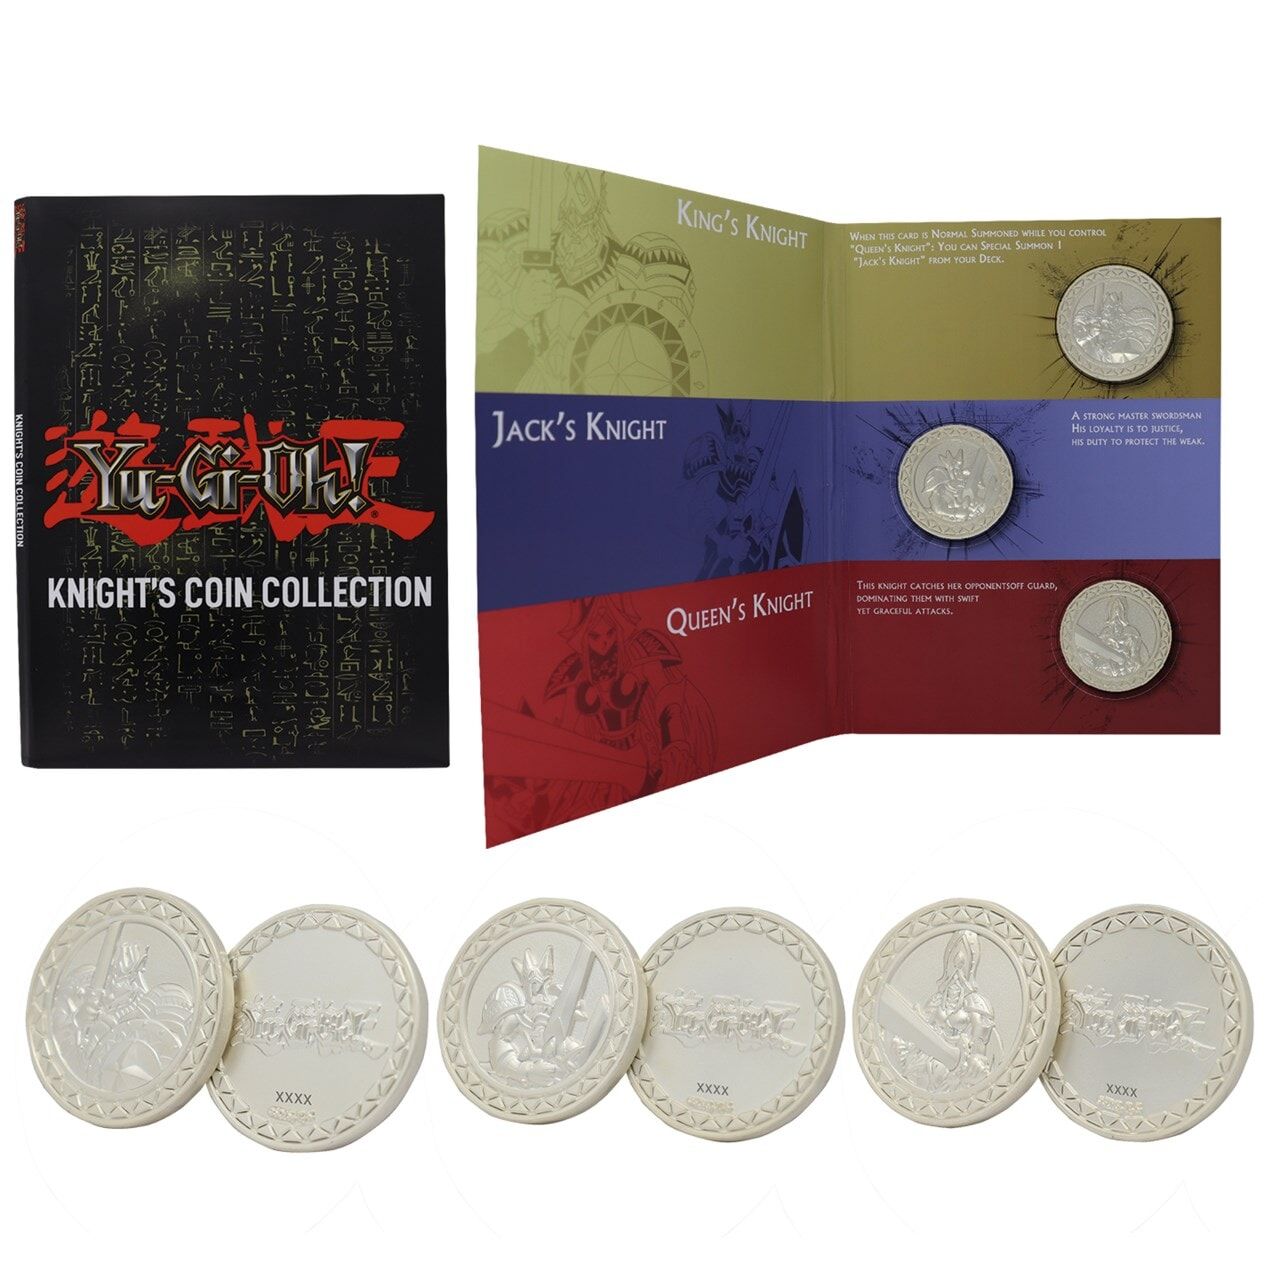 Yu-Gi-Oh! Knights Collection Limited Edition Coin Collection